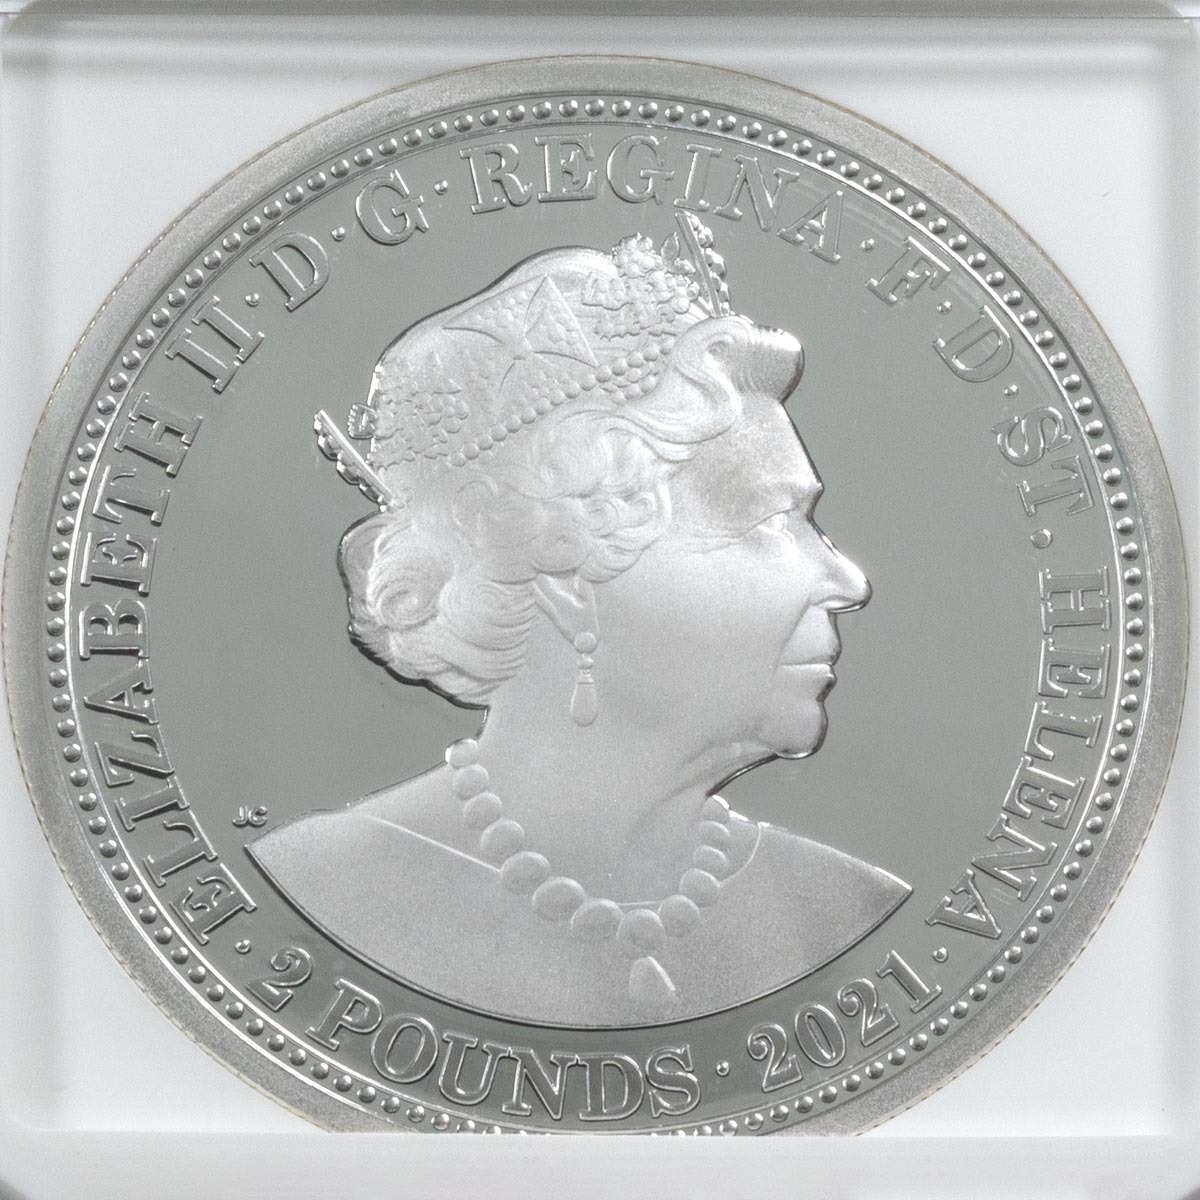 2021 St Helena Saint Helena Three Graces Two Ounce Silver Proof Coin NGC Graded PF 69 Ultra Cameo First Releases Obverse